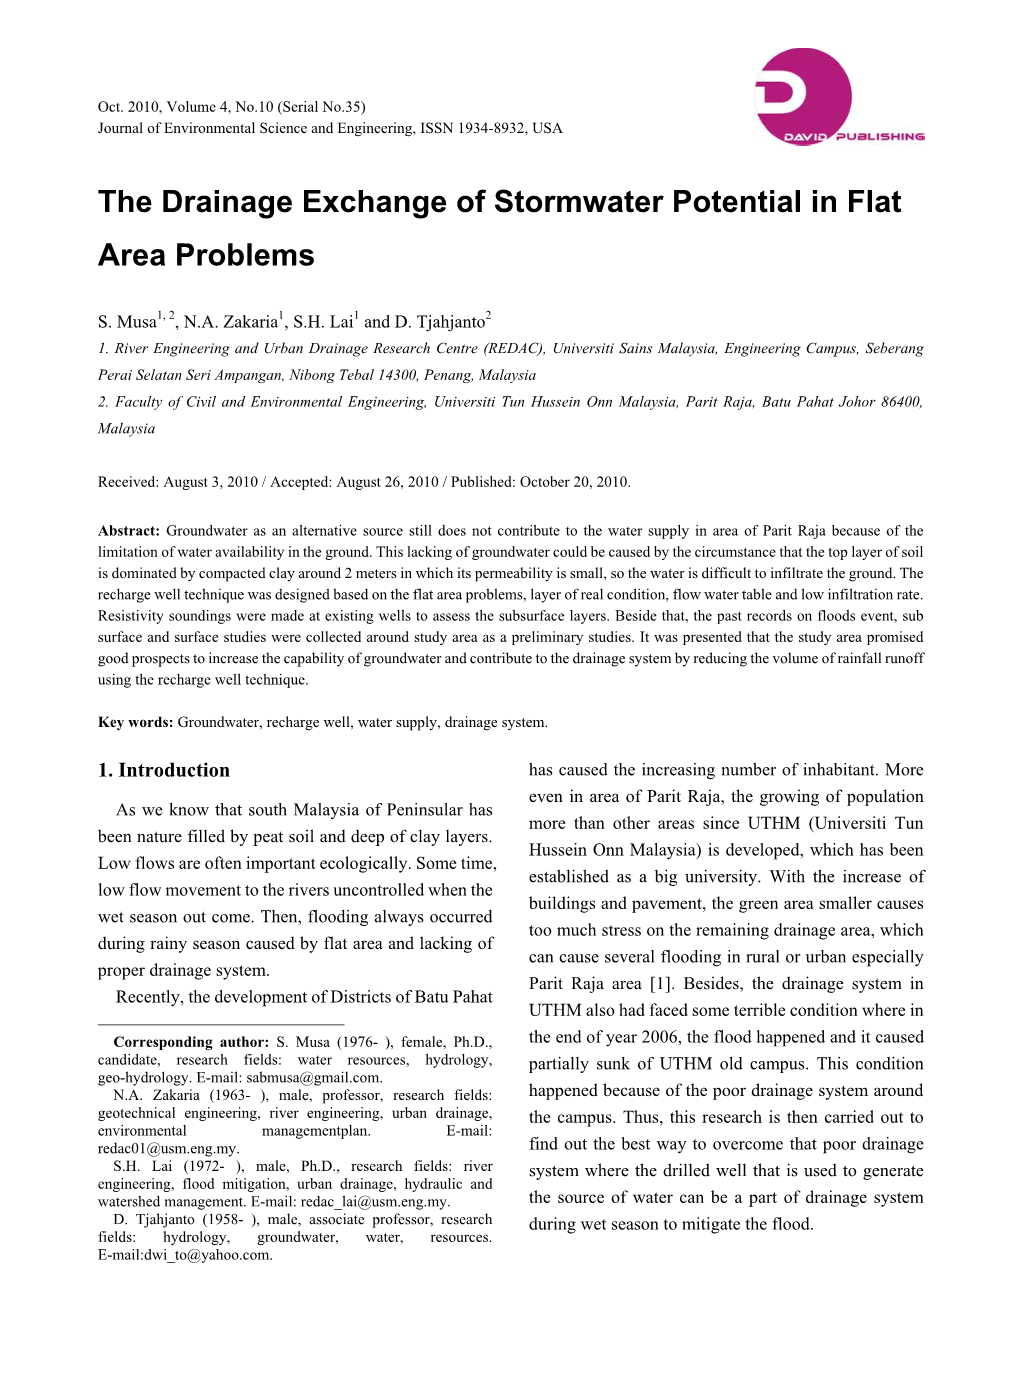 The Drainage Exchange of Stormwater Potential in Flat Area Problems